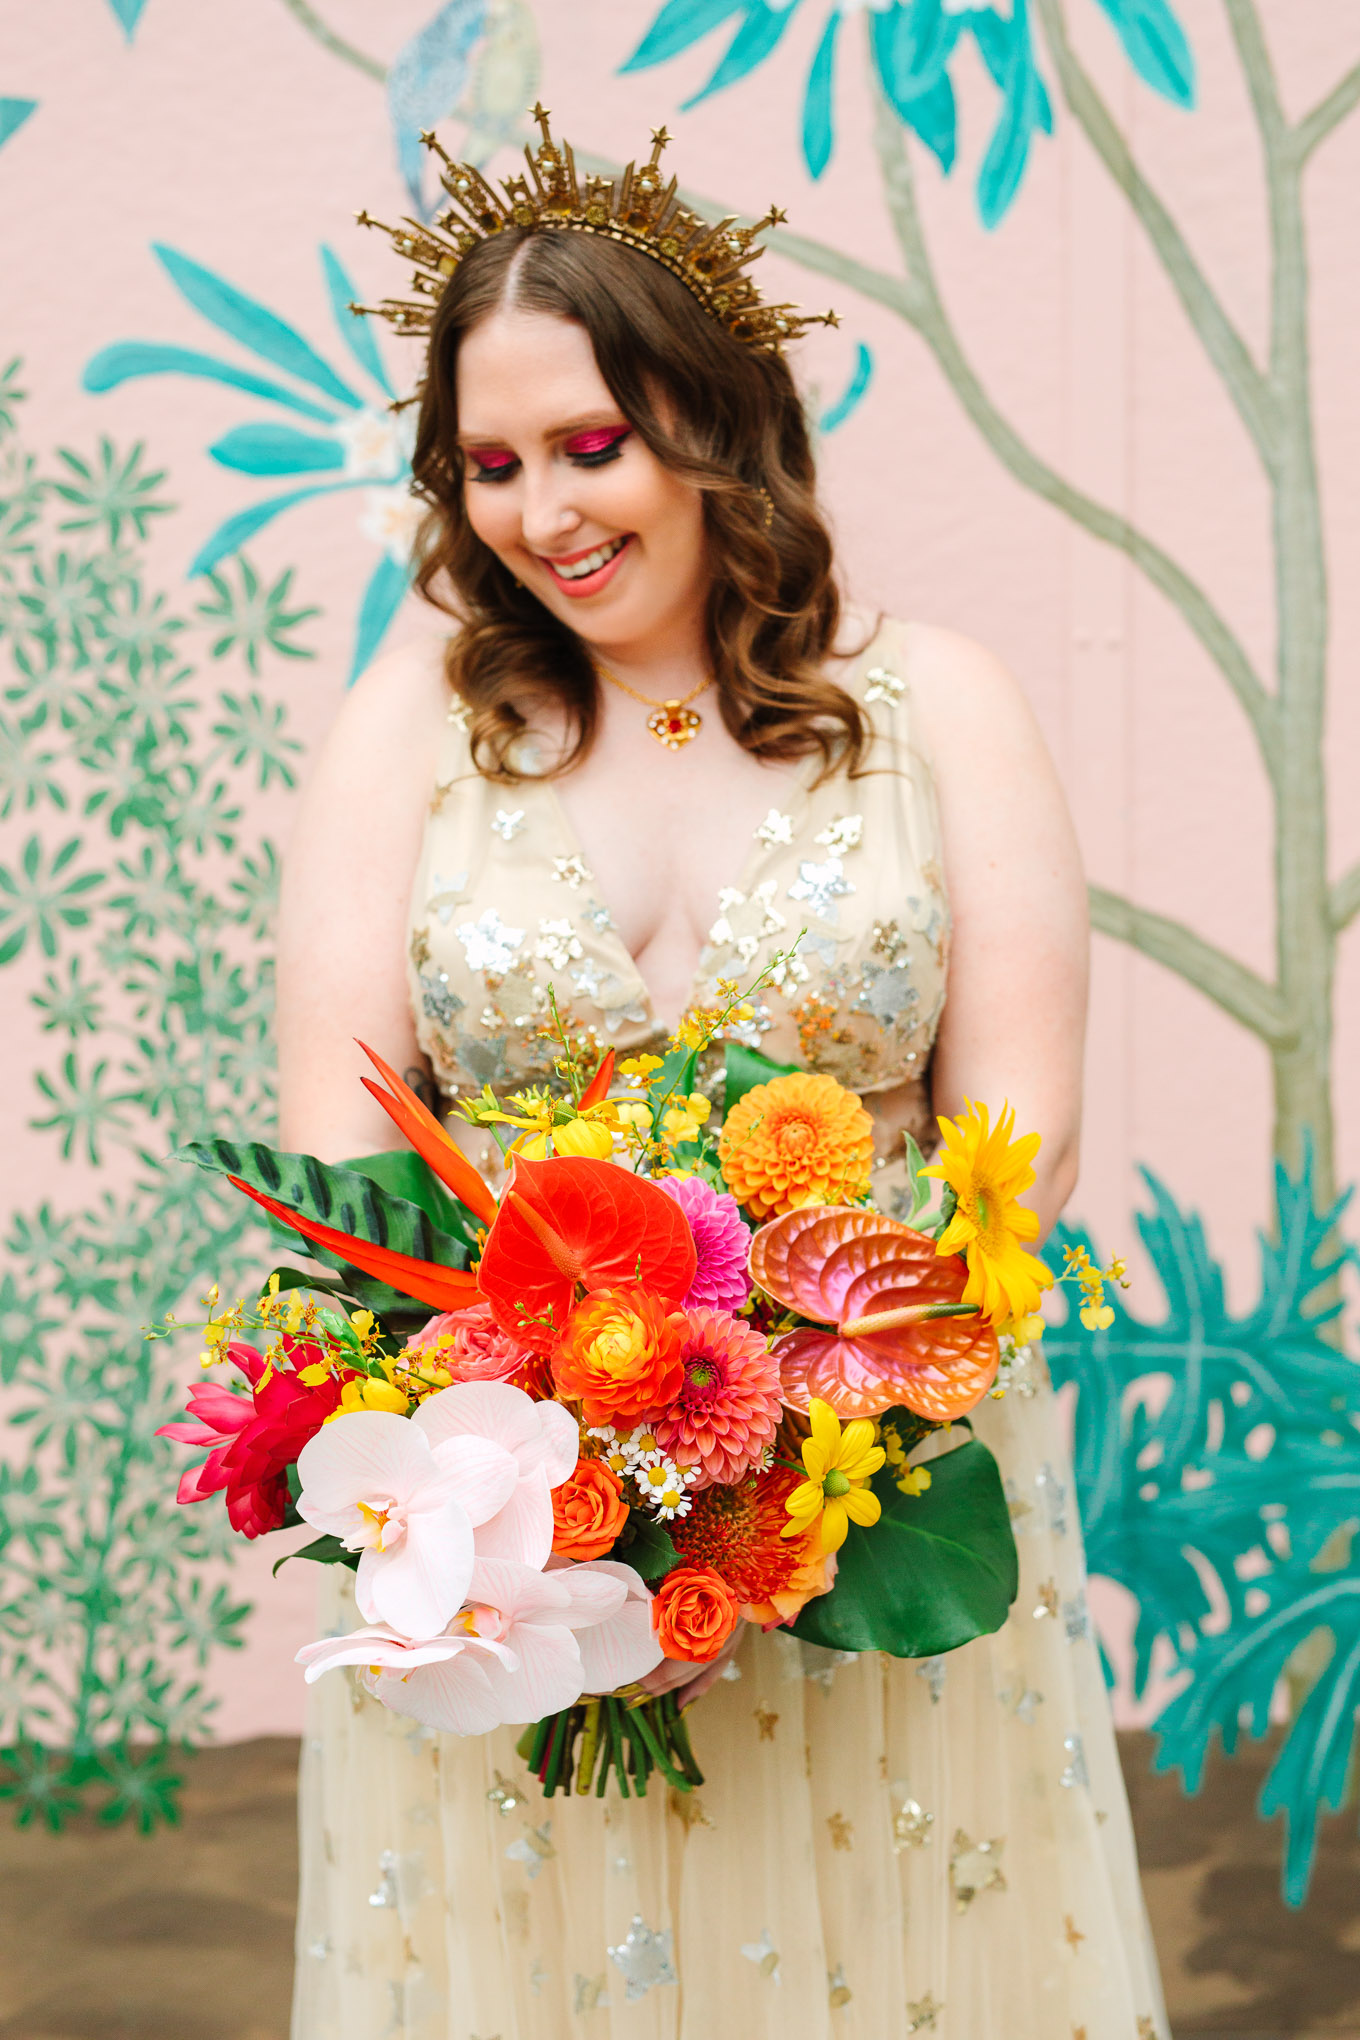 Bride holding tropical vibrant bouquet | Colorful Downtown Los Angeles Valentine Wedding | Los Angeles wedding photographer | #losangeleswedding #colorfulwedding #DTLA #valentinedtla   Source: Mary Costa Photography | Los Angeles